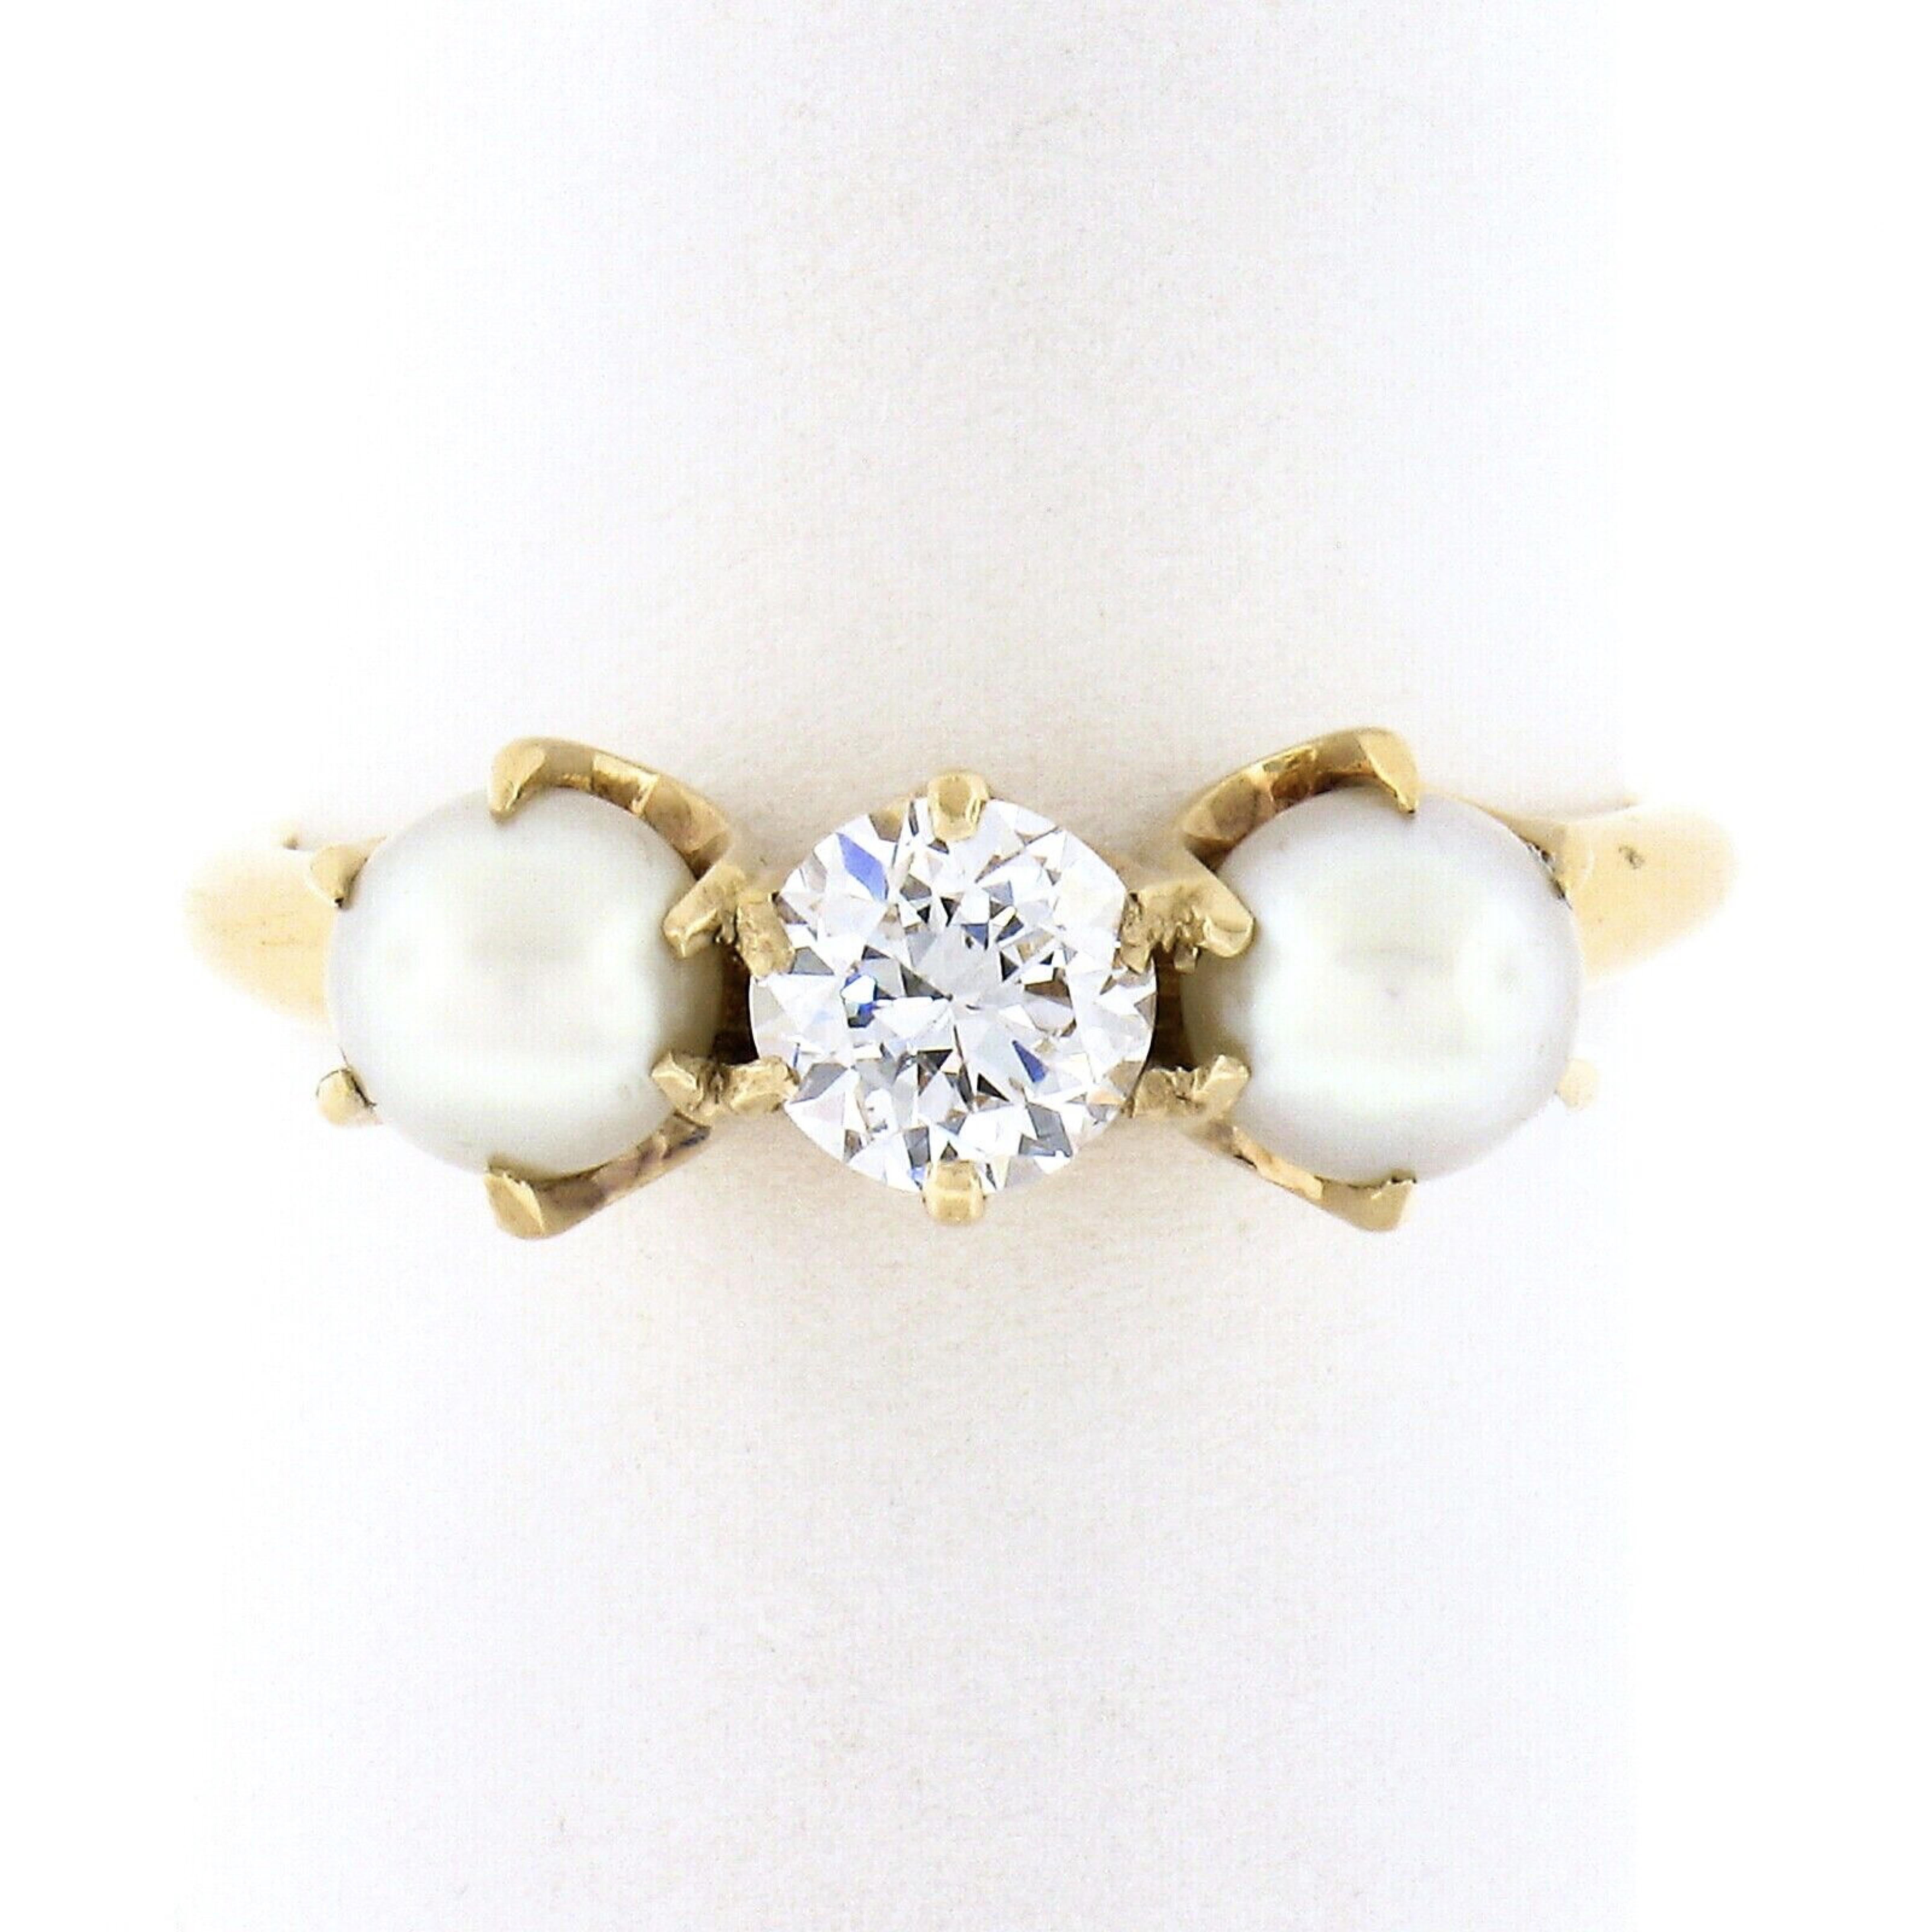 This simply gorgeous antique ring was crafted from solid 14k yellow gold and features a classic and absolutely stunning combination of diamond and pearls elegantly prong set across its top. The super fiery old European cut diamond solitaire sits at